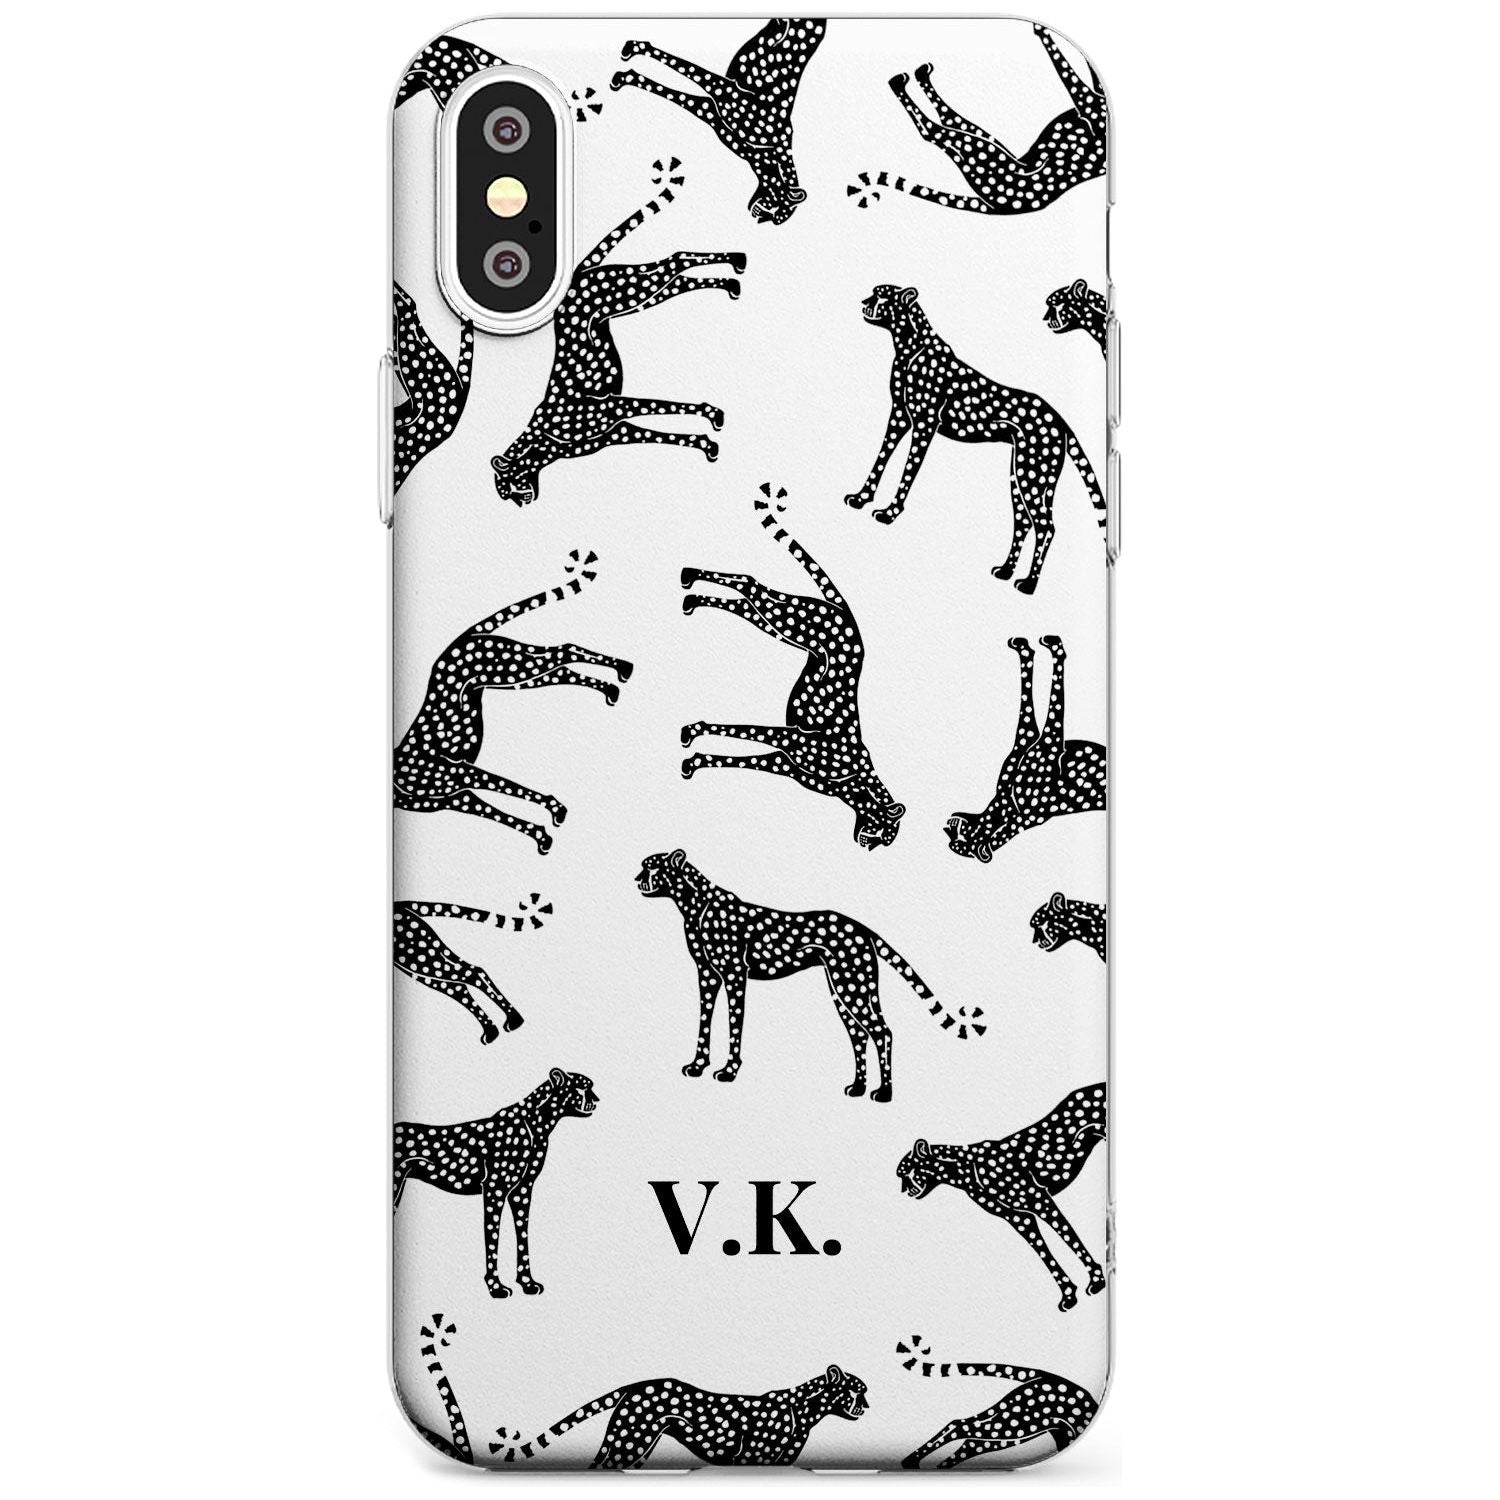 Personalised Cheetah Pattern: Black & White Black Impact Phone Case for iPhone X XS Max XR